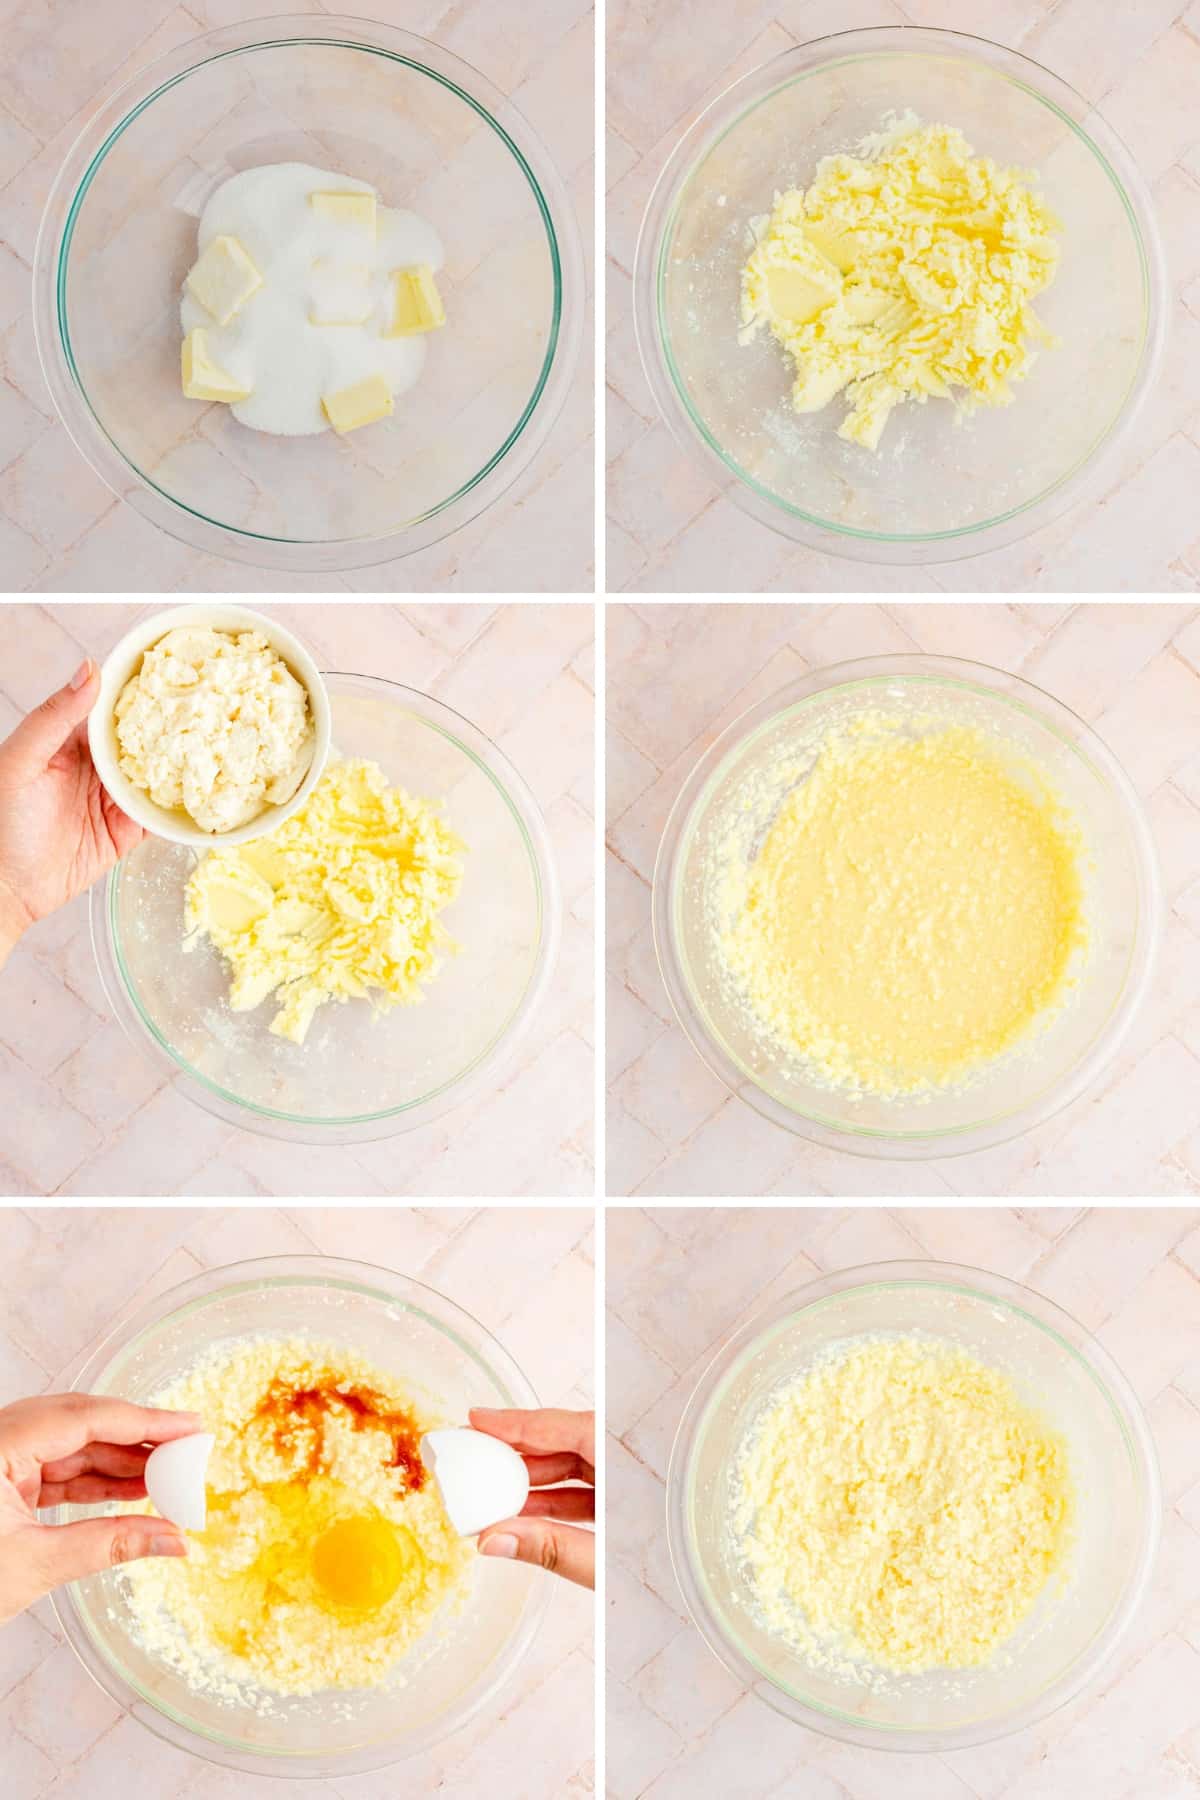 Collage image showing how to mix wet ingredients.